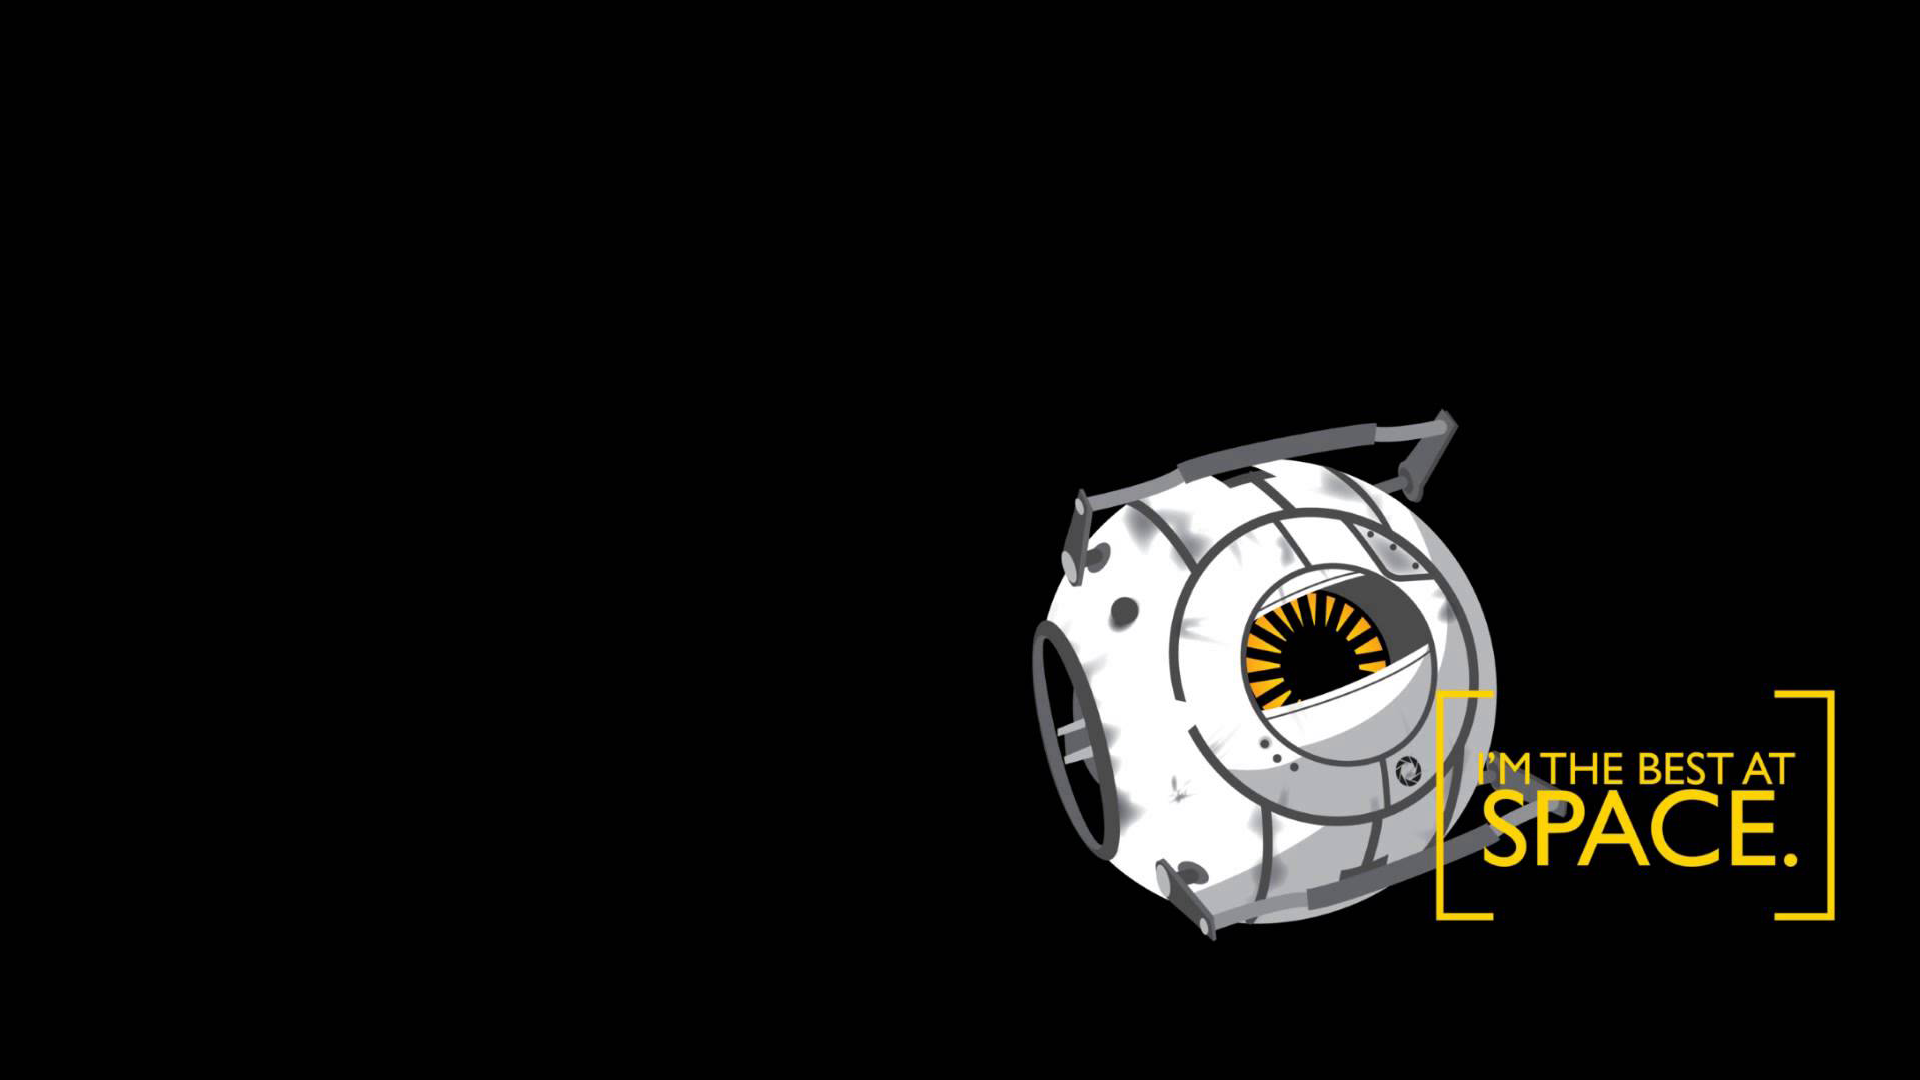 General 1920x1080 space Portal 2 video games Portal (game) black simple background text